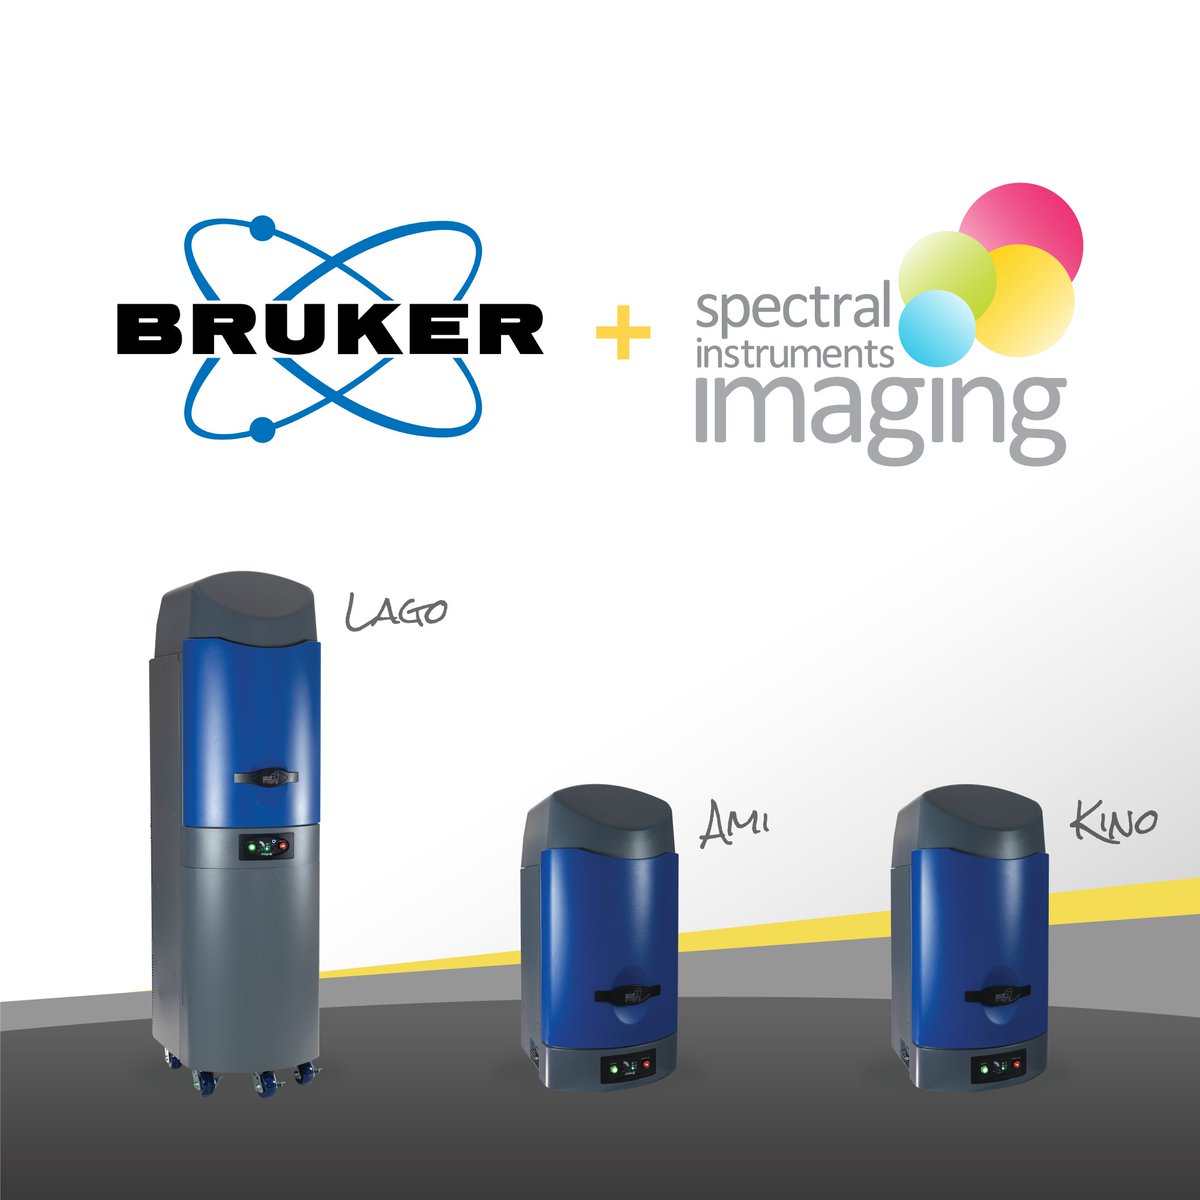 Exciting news! 🎉 Spectral Instruments Imaging has officially joined forces with Bruker! 🚀 SII, together with Bruker, is THE Performance leader in Preclinical In-Vivo Optical Imaging. Learn More: ow.ly/RkiN50QyZy5 #bruker #invivoimaging